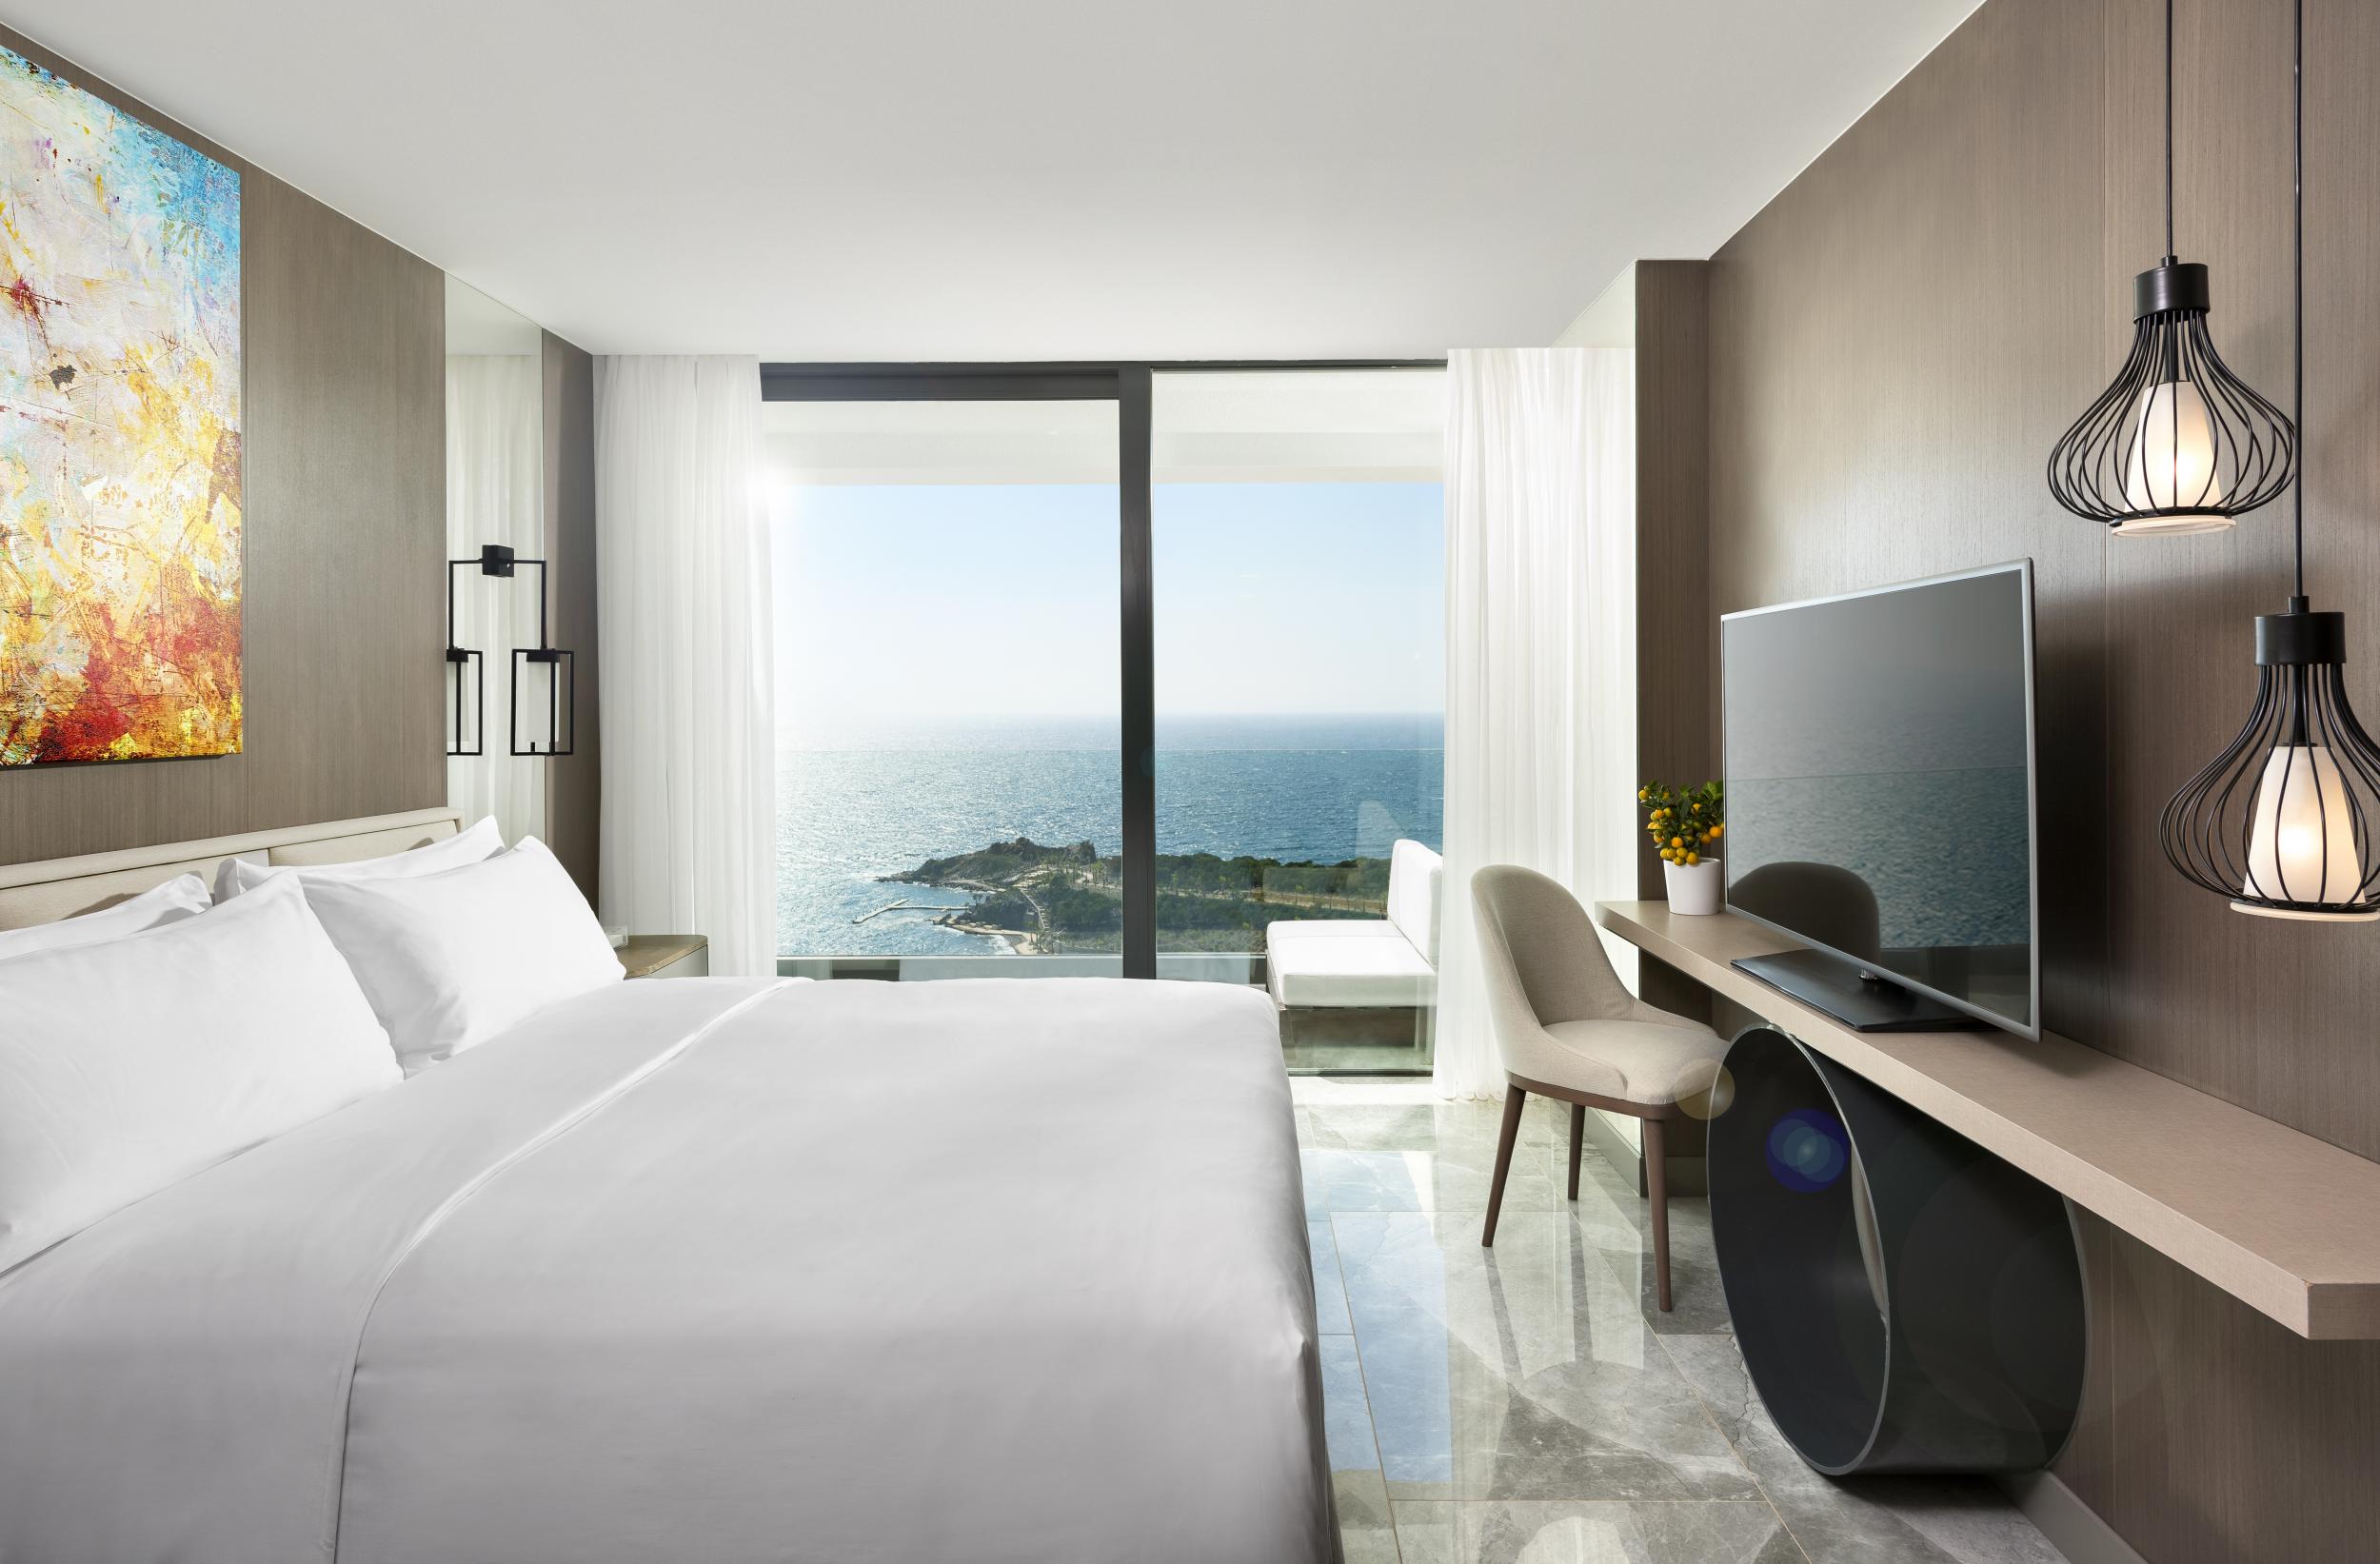 The sea front bedrooms provide an oasis of calm